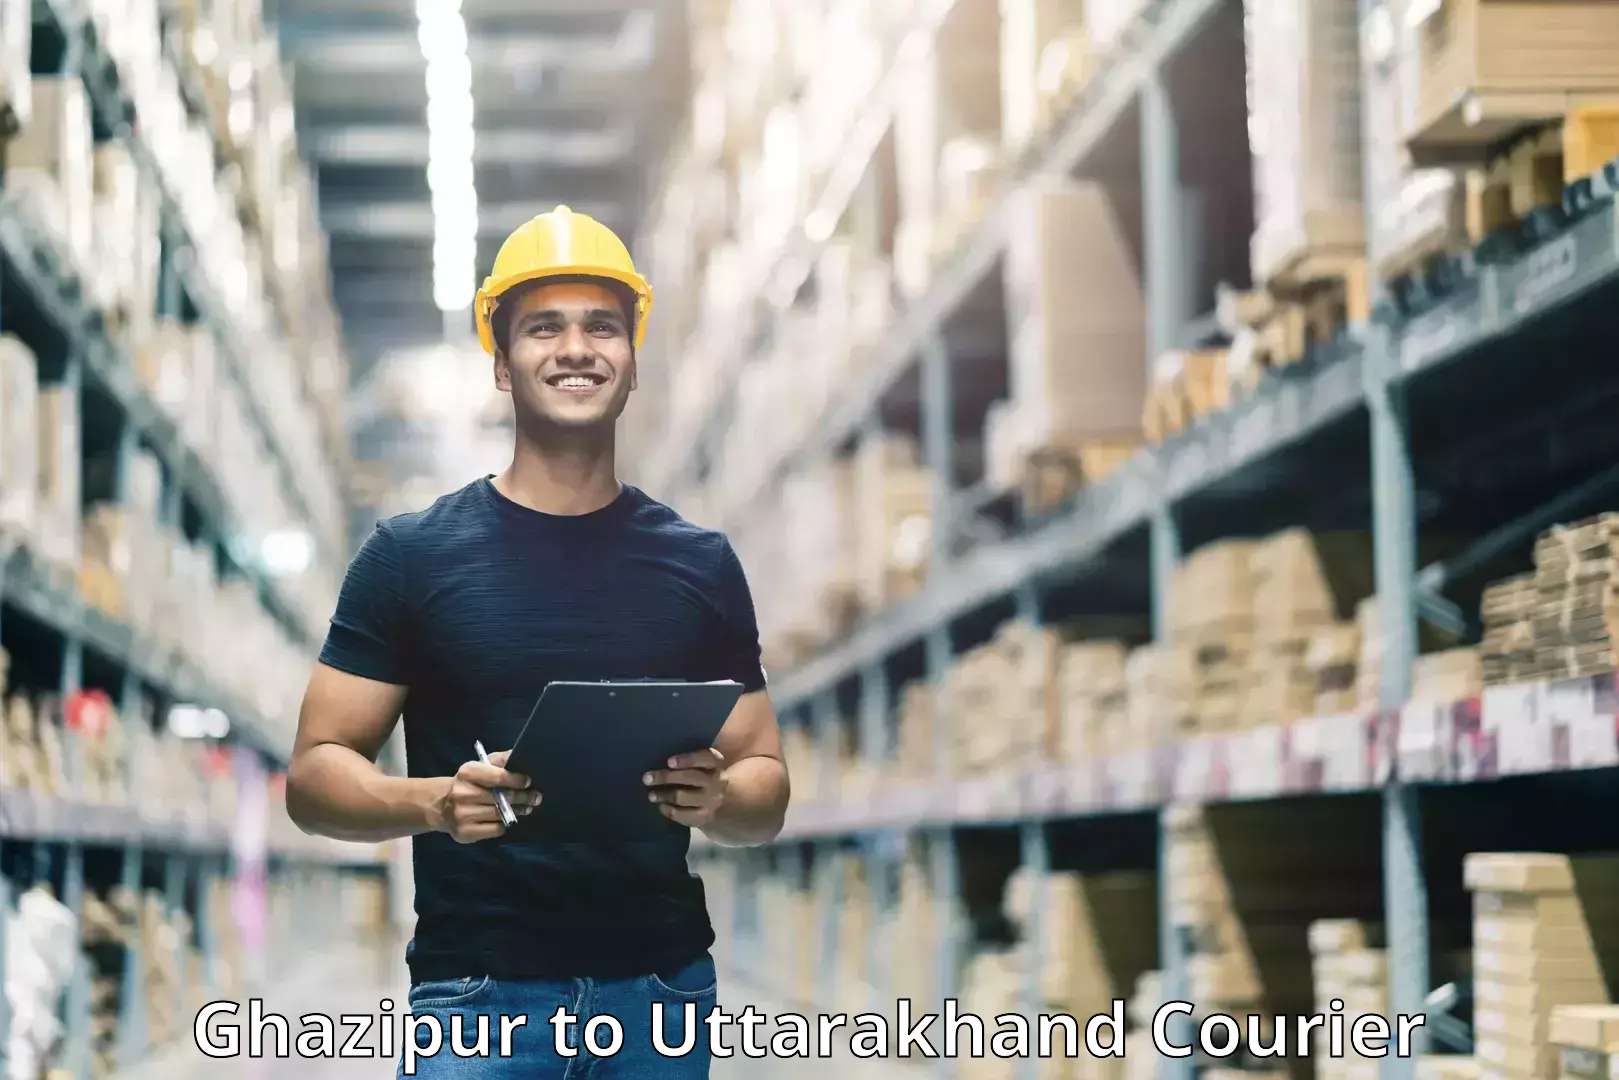 User-friendly delivery service Ghazipur to Rudrapur